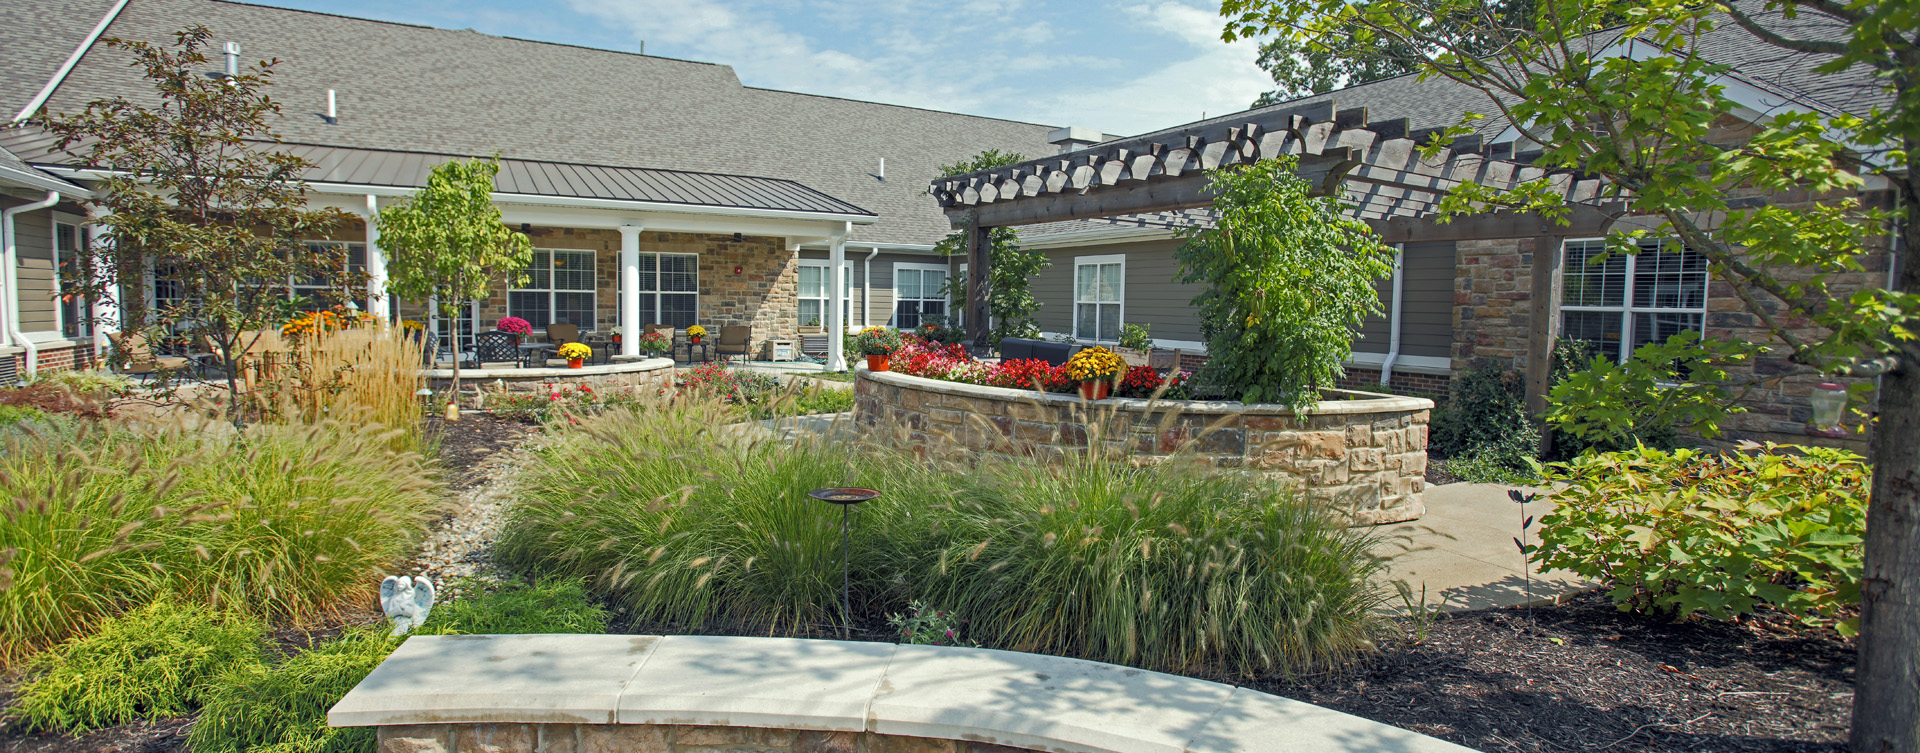 Enjoy bird watching, gardening and barbecuing in our courtyard at Bickford of Carmel